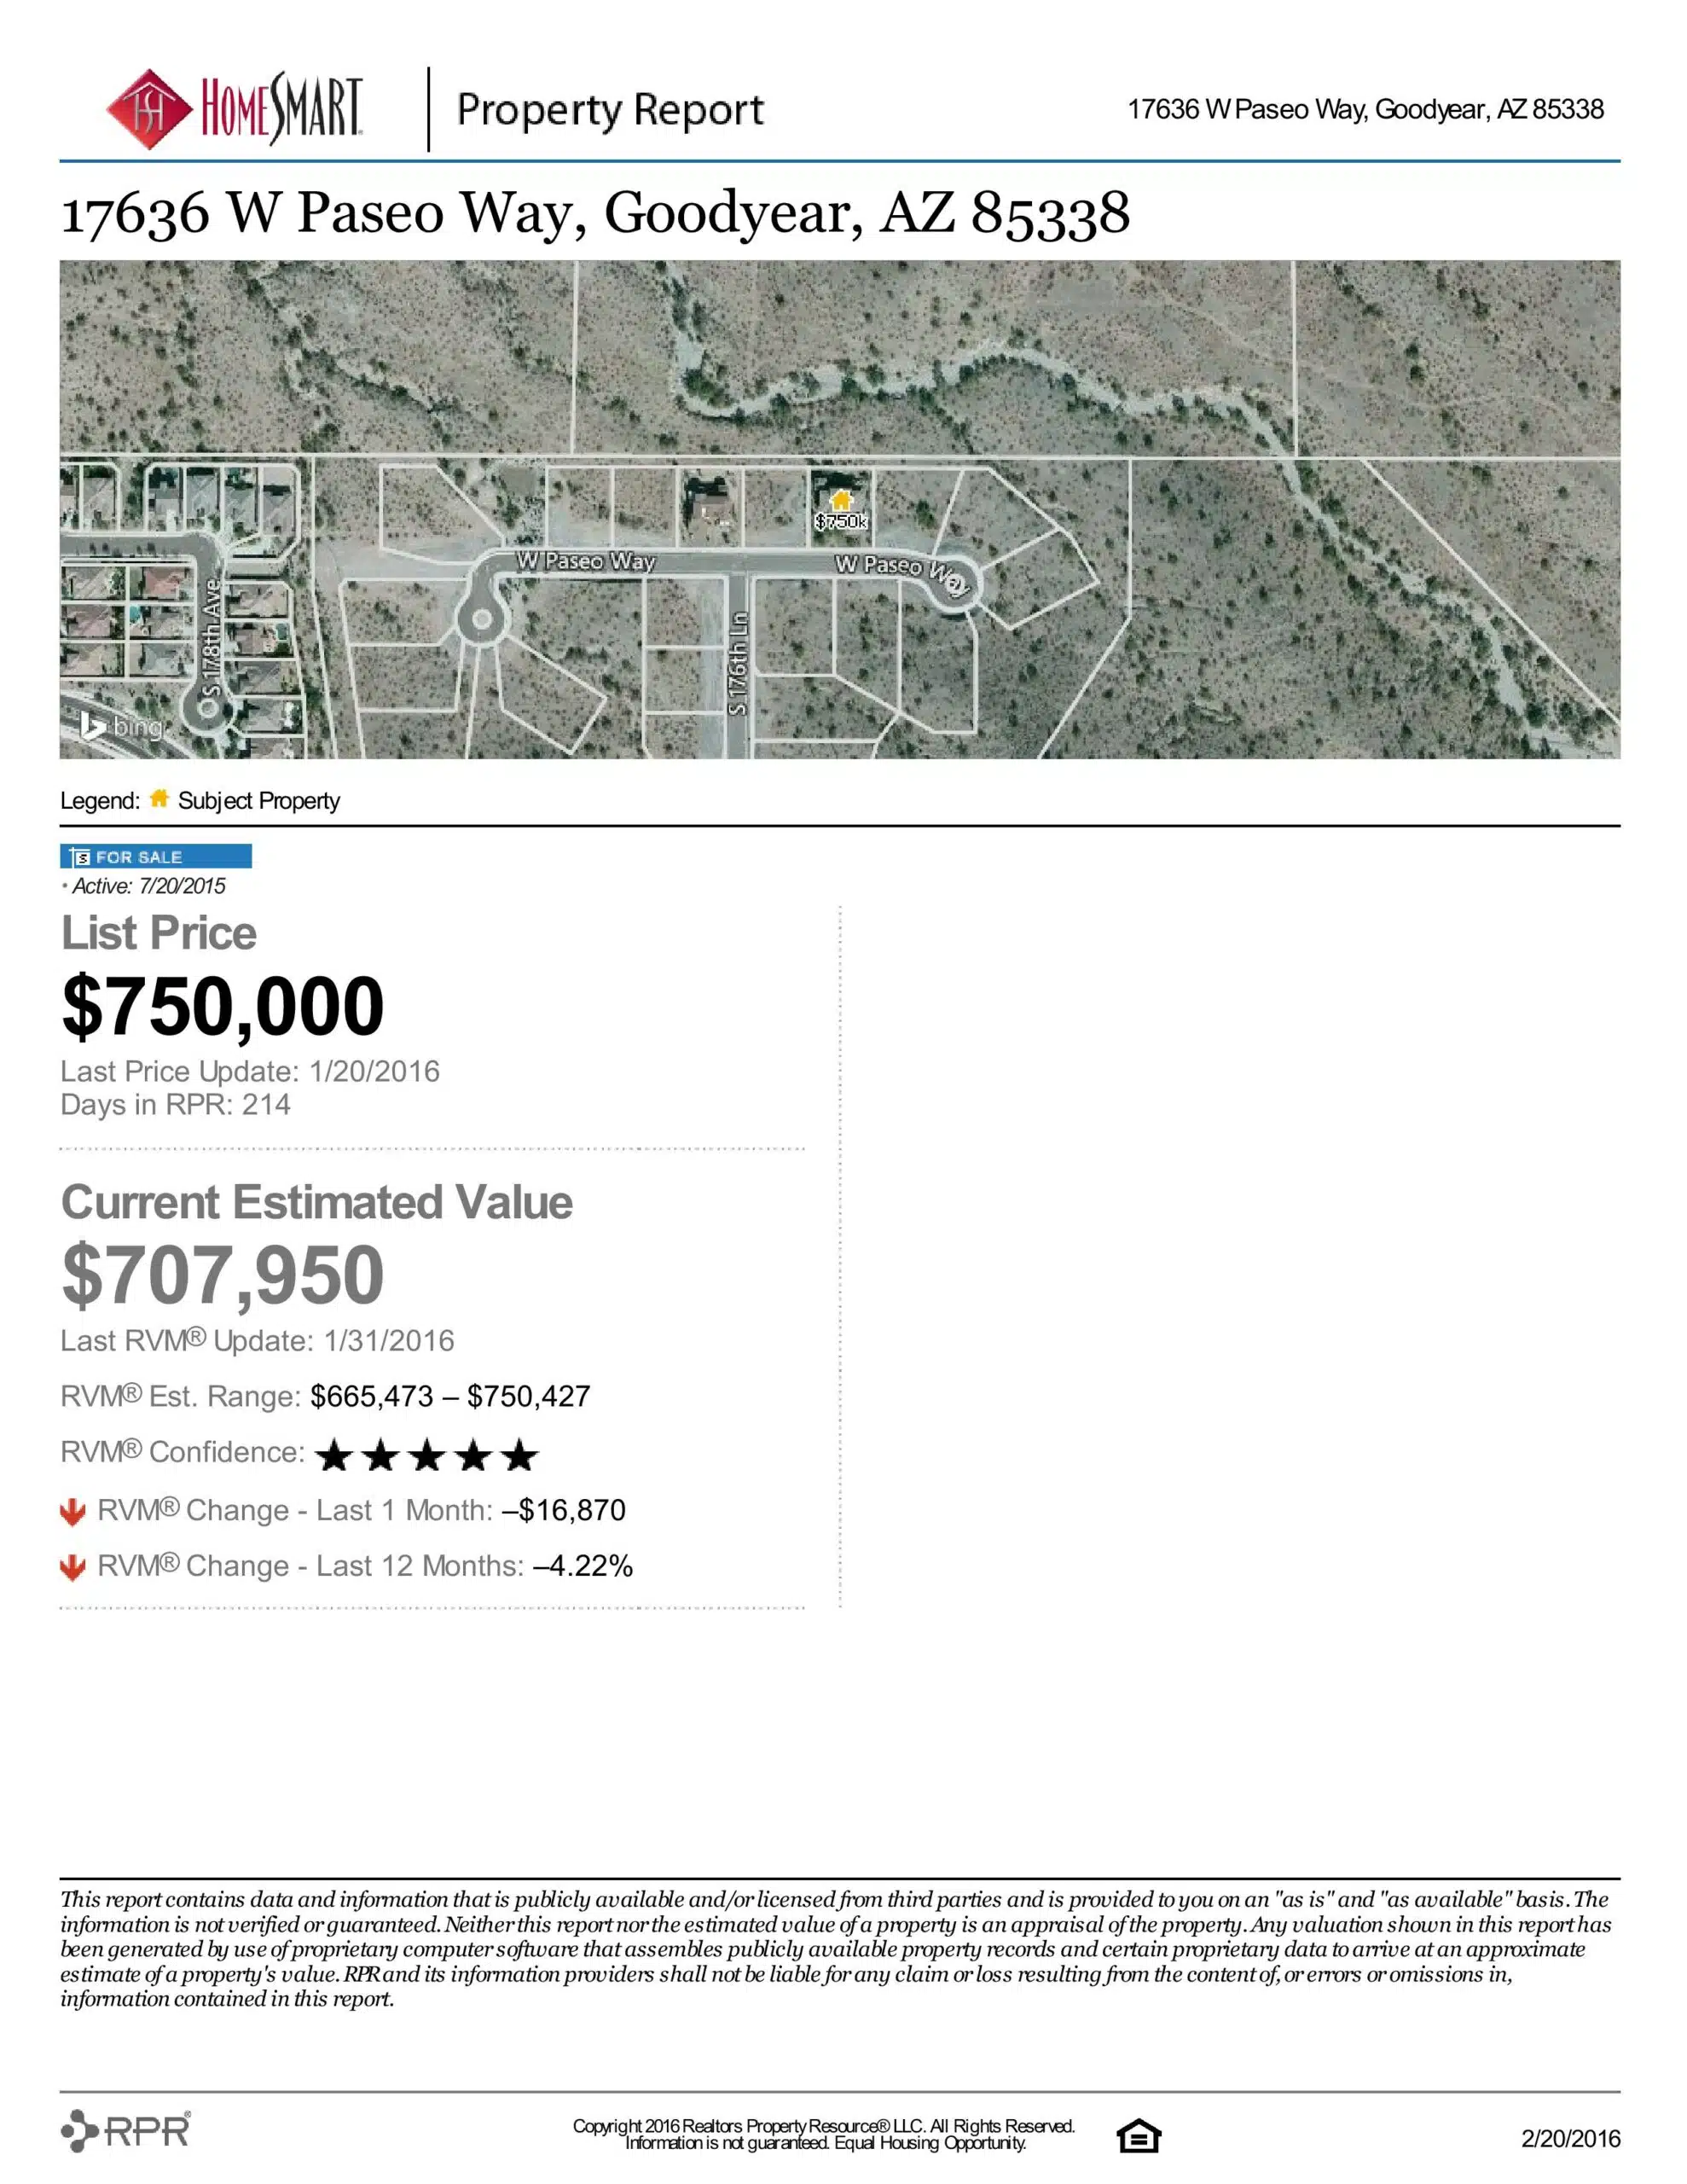 17636 W PASEO WAY PROPERTY REPORT